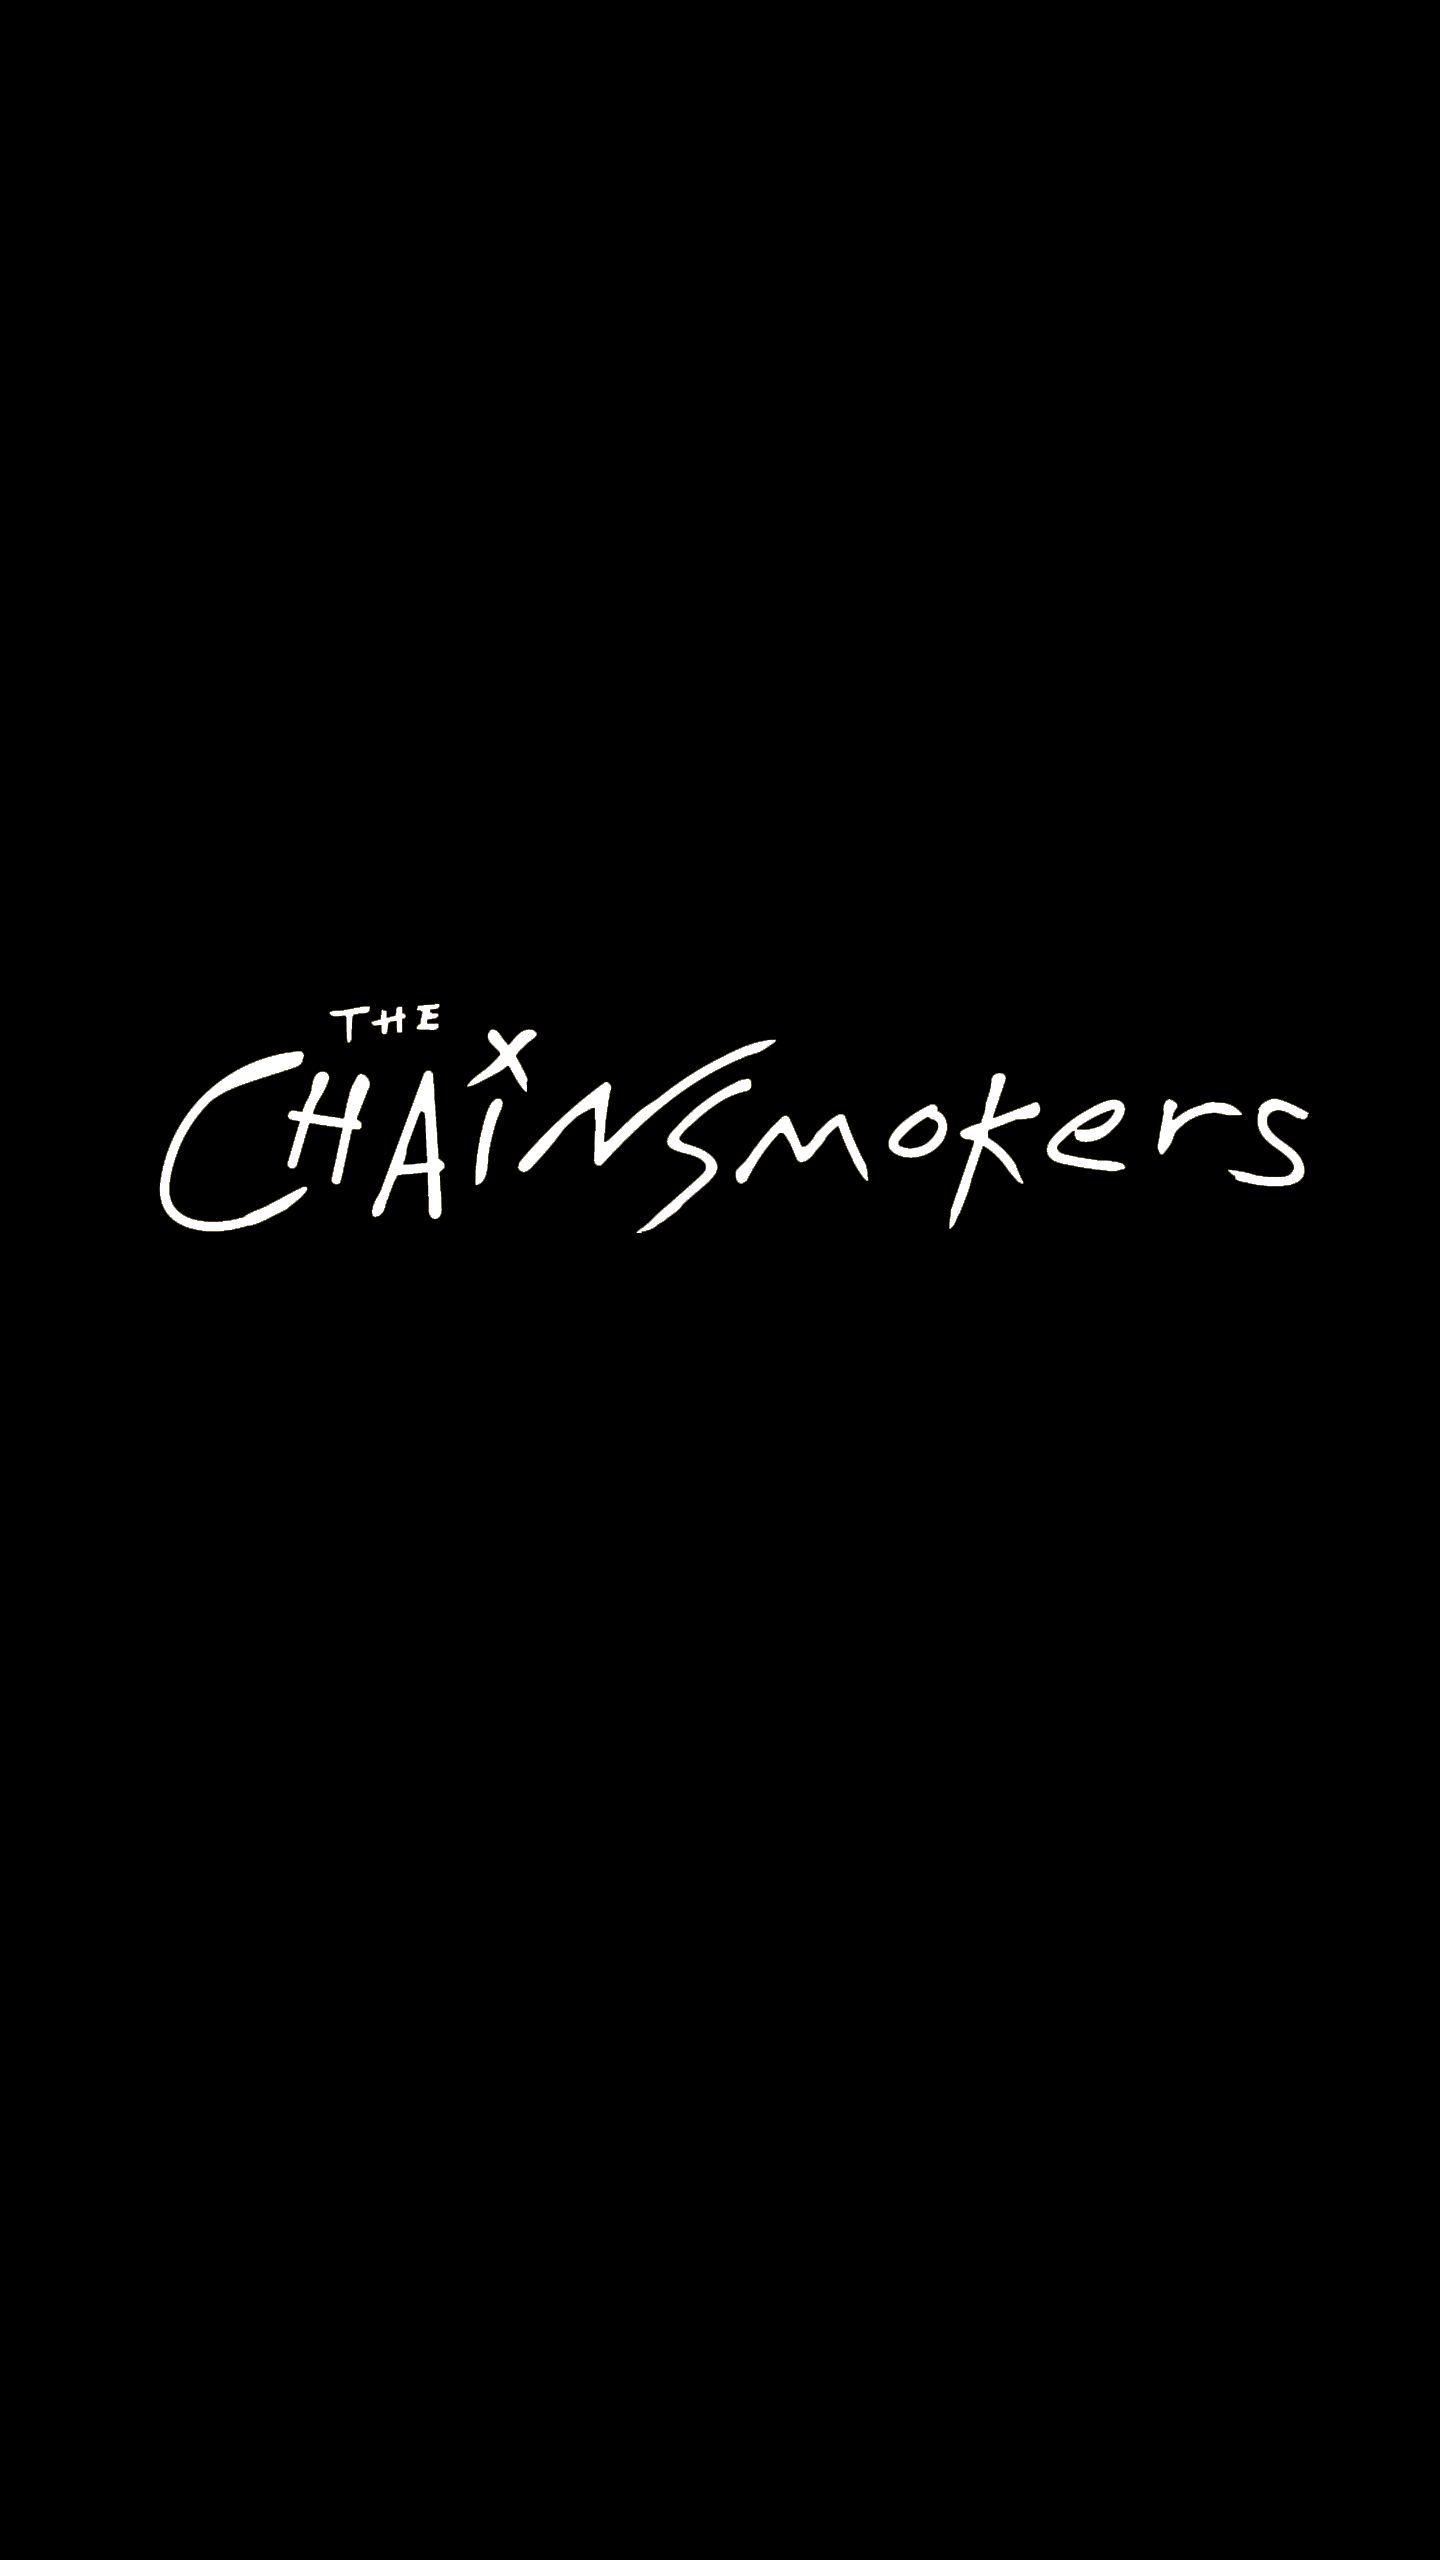 The Chain Smokers Wallpaper Free The Chain Smokers